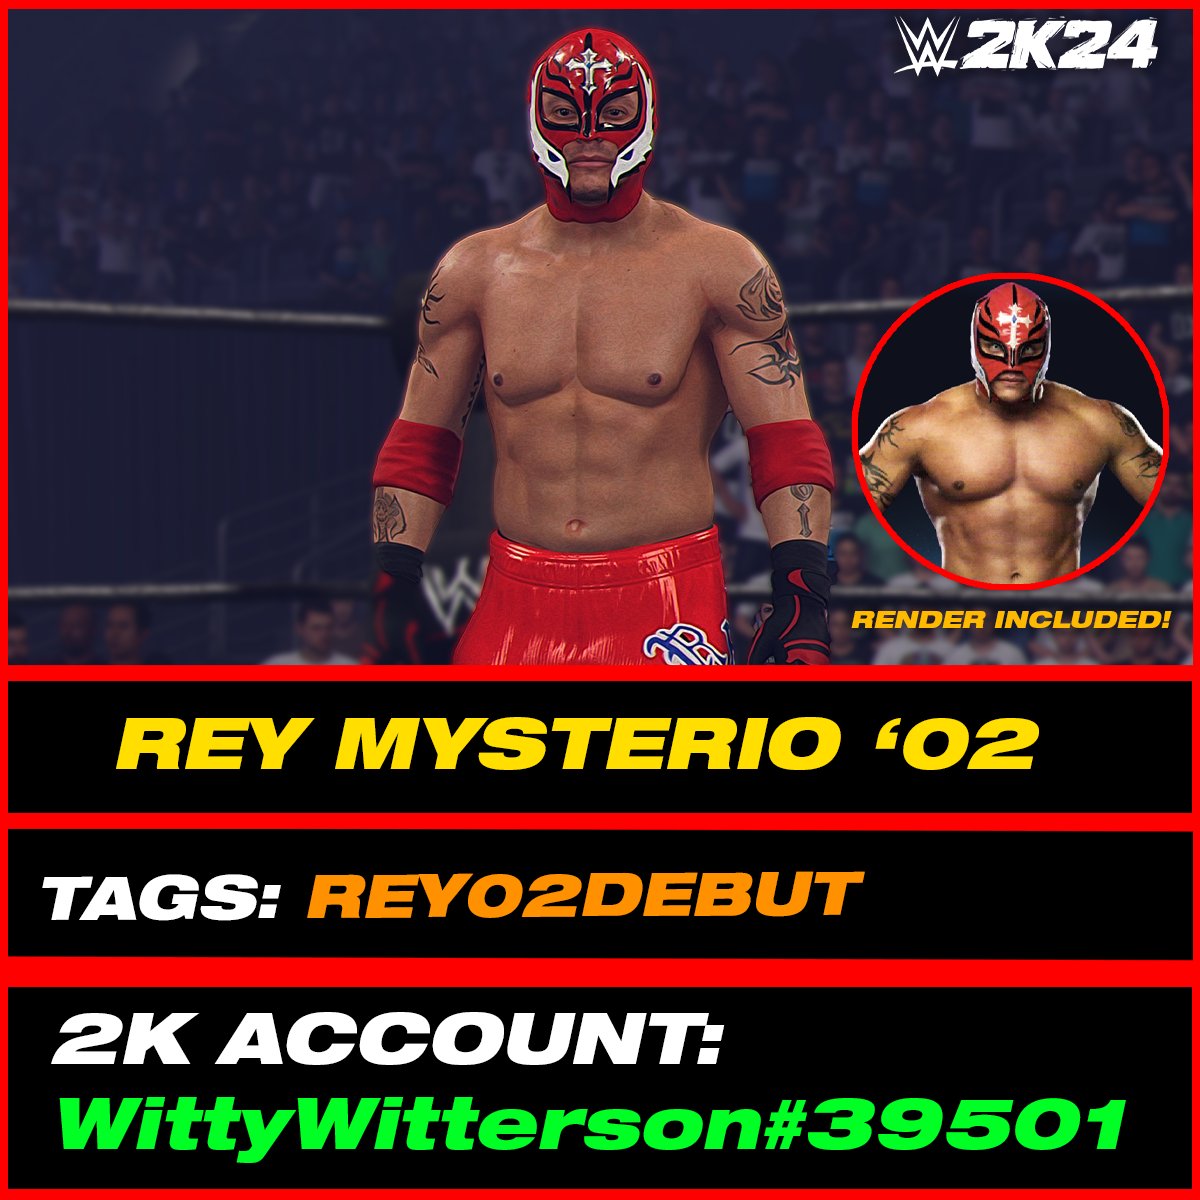 Rey Mysterio '02 (In-Game Edit) is uploaded onto Community Creations #WWE2K24

•Tags: REY02DEBUT, WITTY226, ReyMysterio
•Attire by @WillAmazin

INCLUDES:
• SILENT Call Name
• Rey Mysterio '06 Commentary
• Accurate Tattoos
• 2002 Attire

• Can be Alt Attire for Rey Mysterio